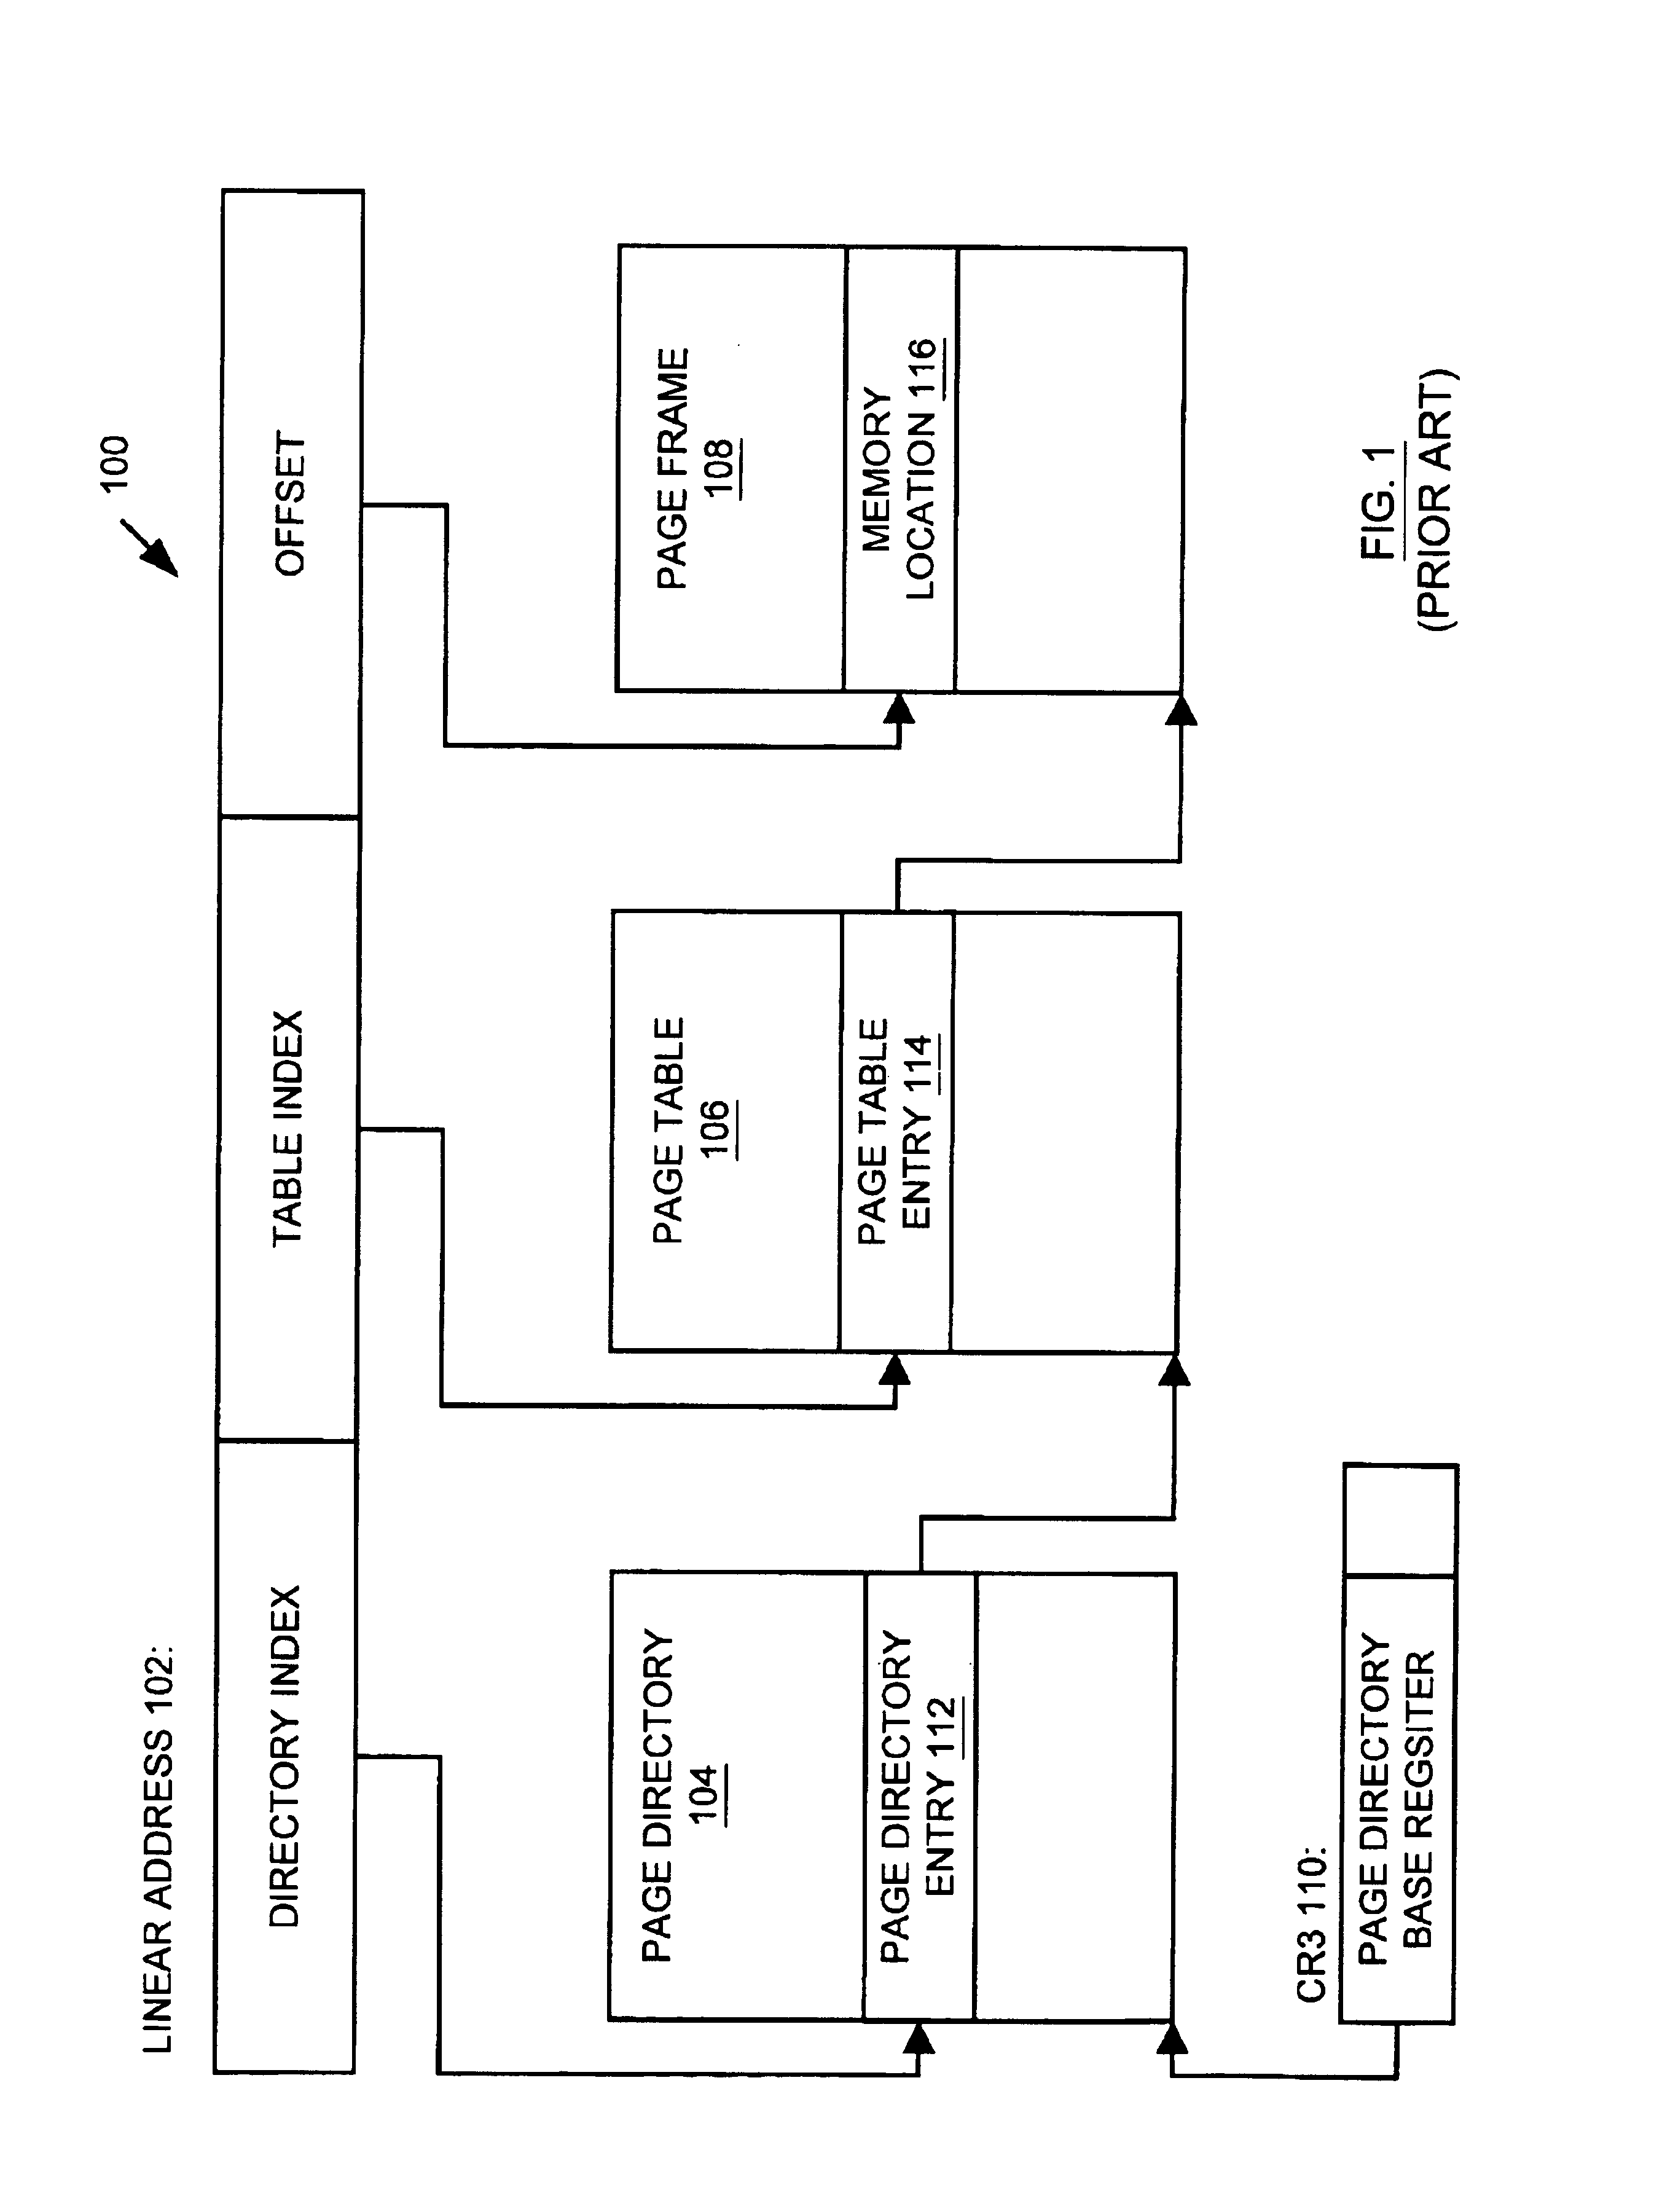 Memory management system and method for providing physical address based memory access security